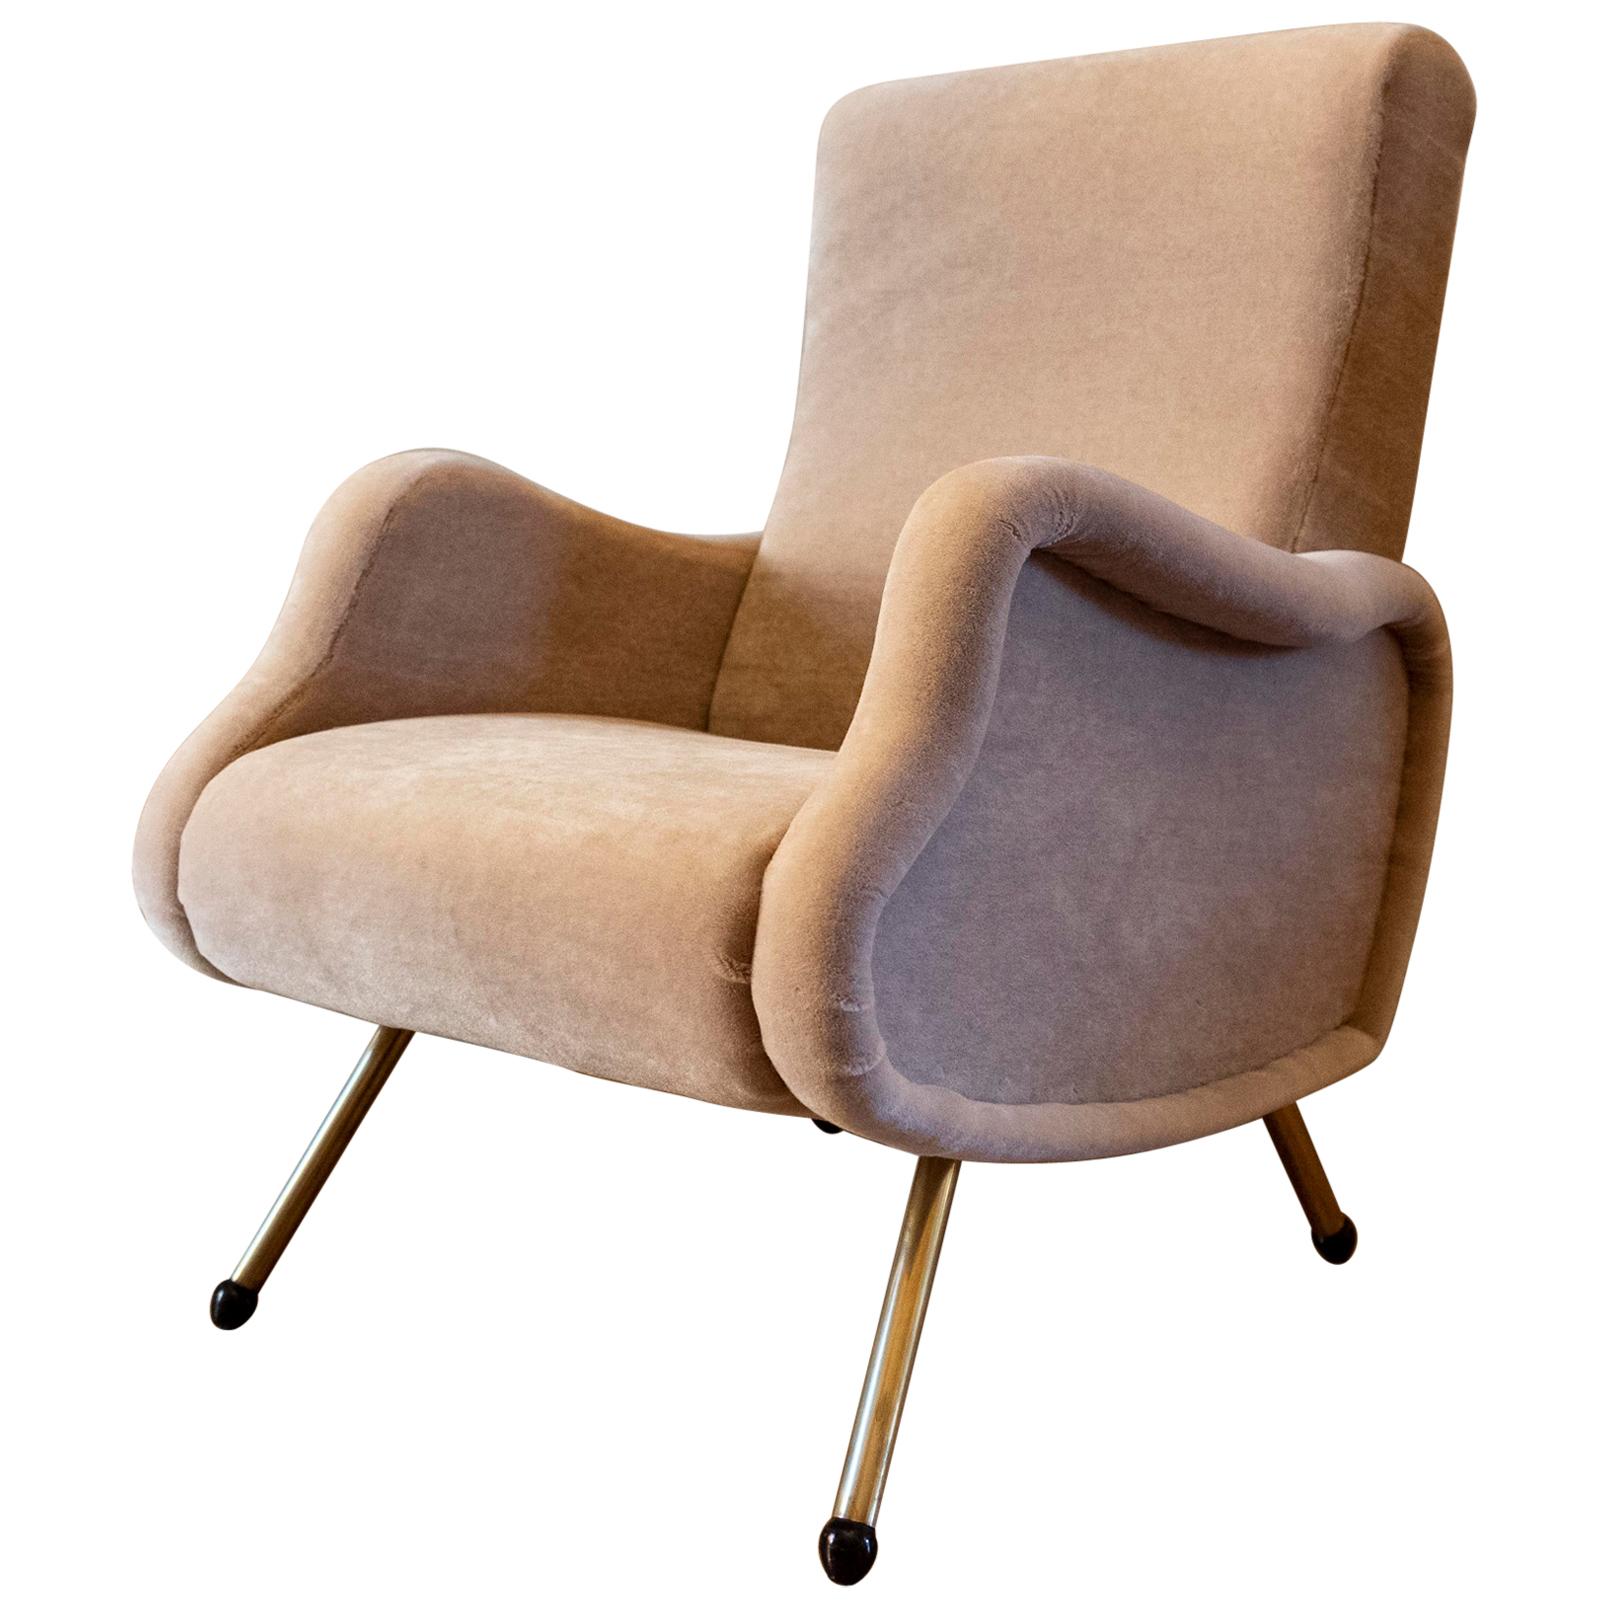 Vintage Lounge Chair, Italy 1950s, Reupholstered in Pierre Frey Velvet Mohair